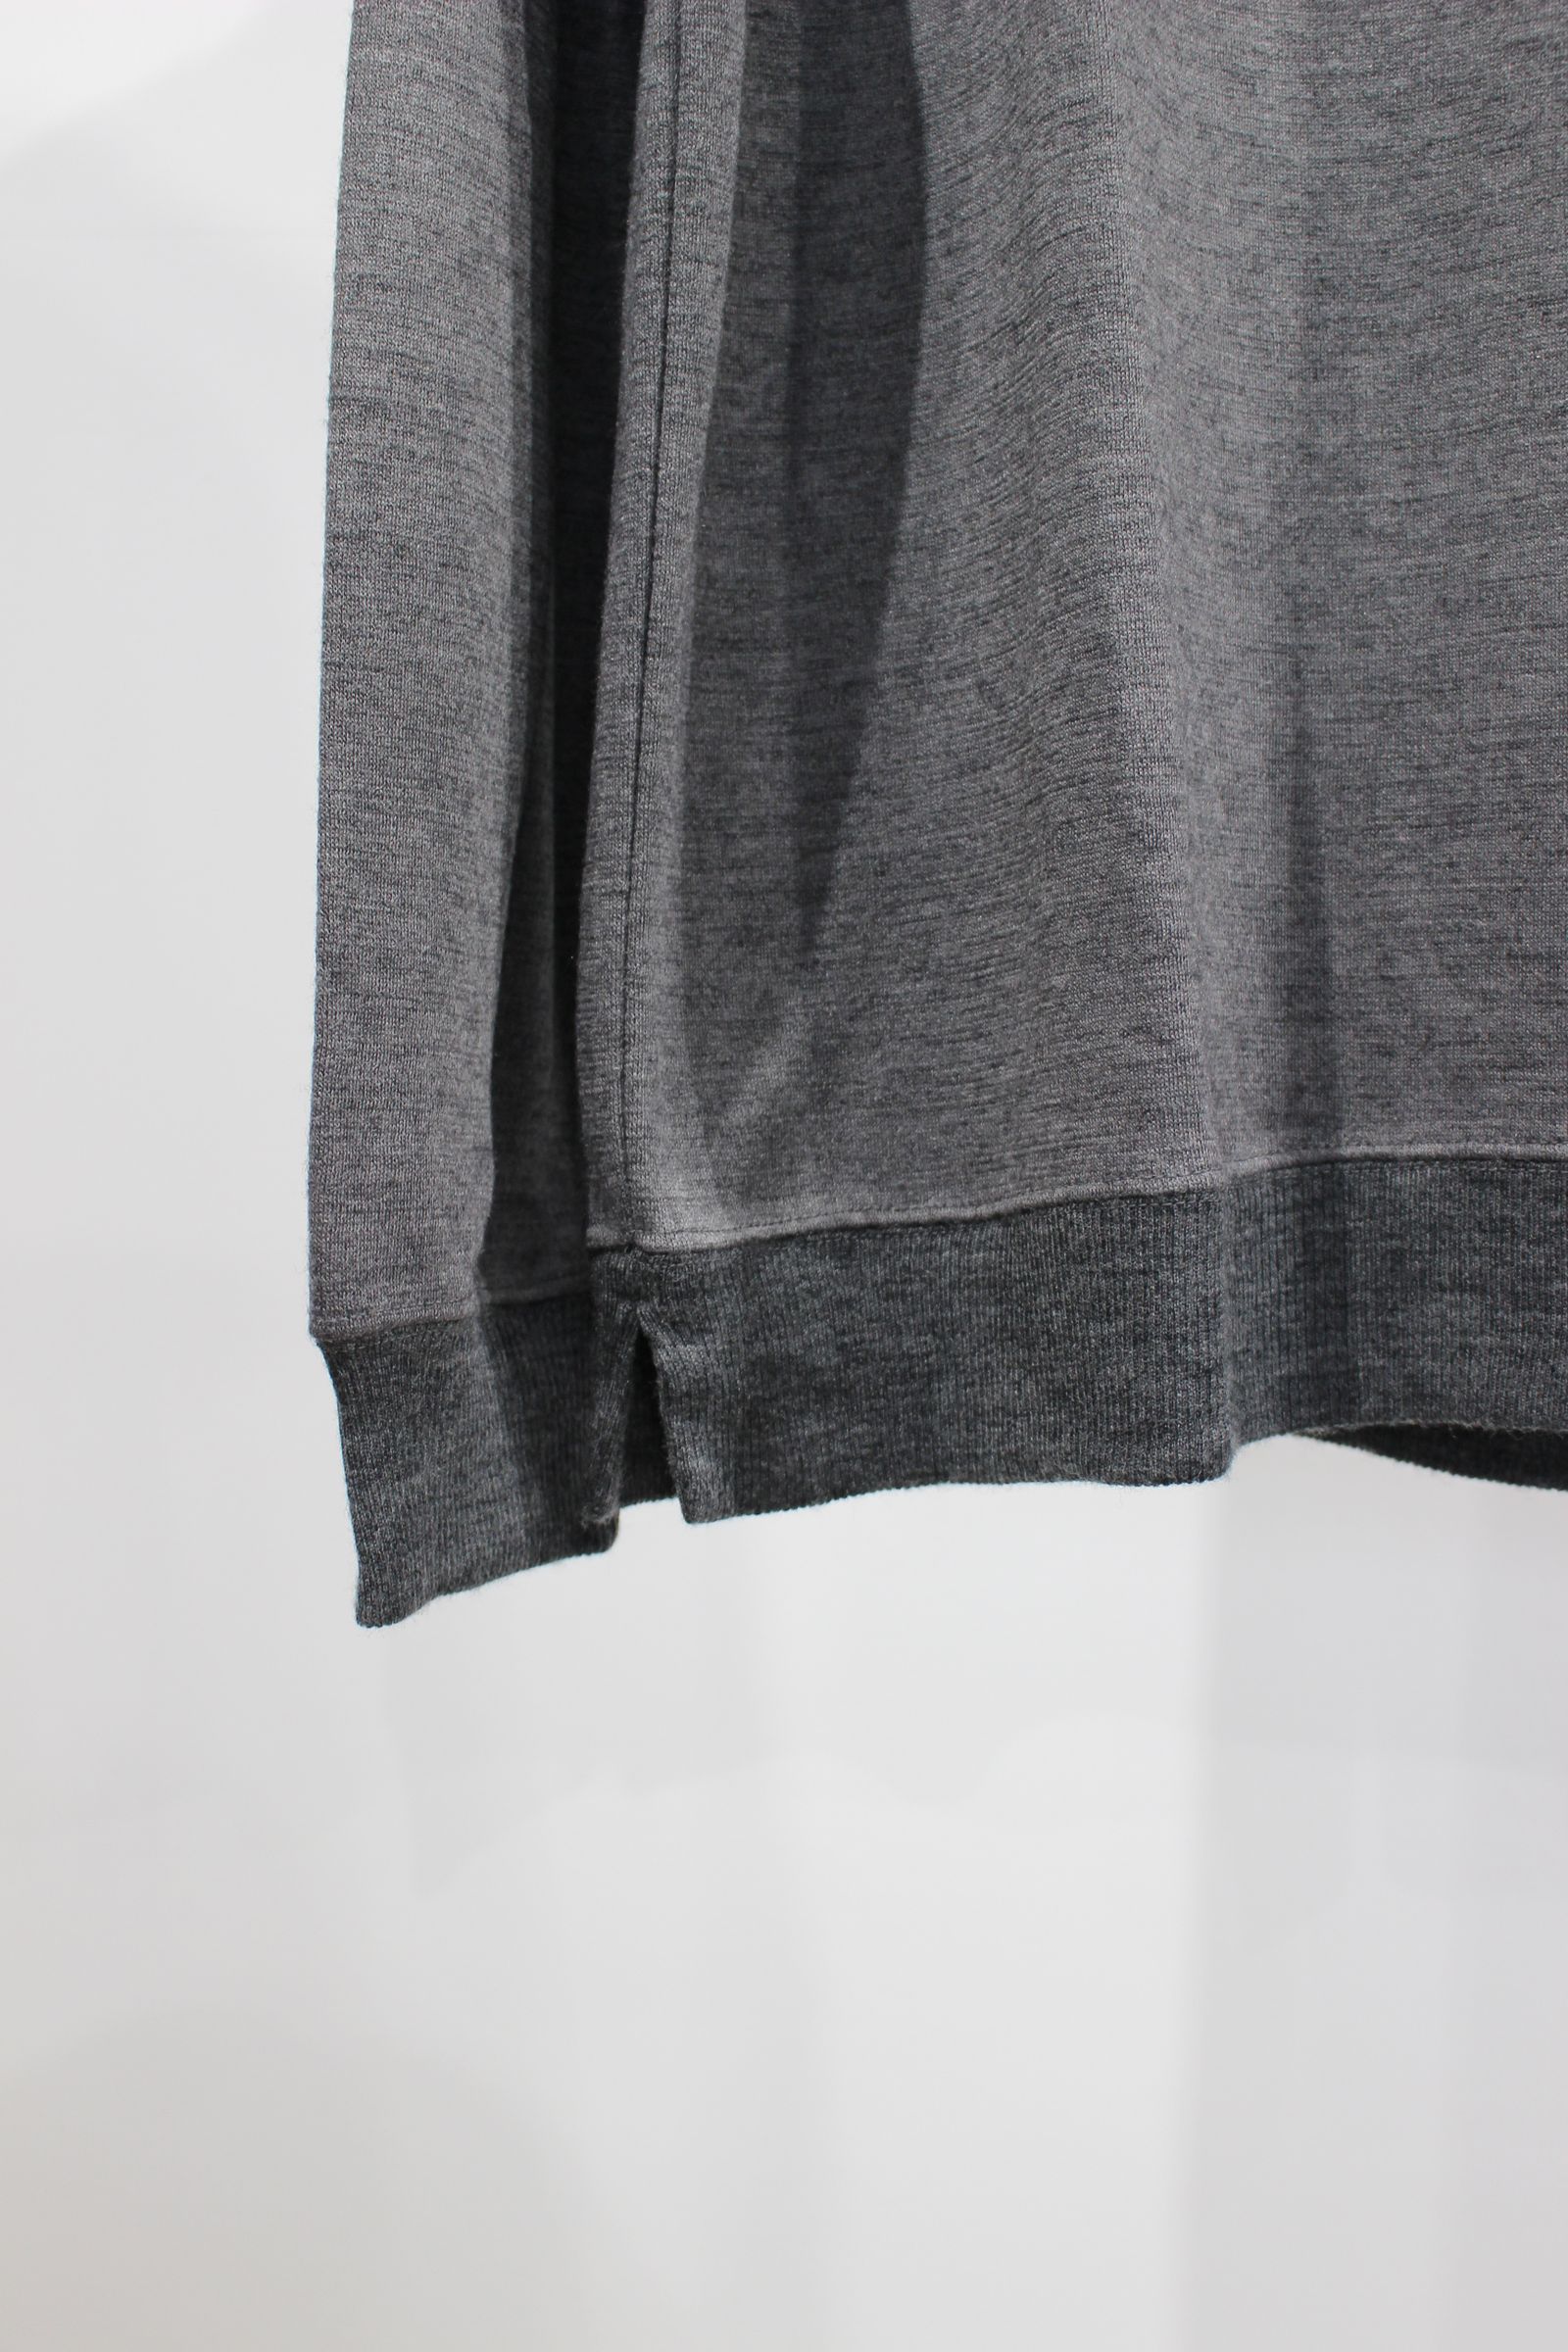 CURLY - [ラスト1点] SOFT WOOL KNIT-SAWN PULLOVER/GRAY | NapsNote